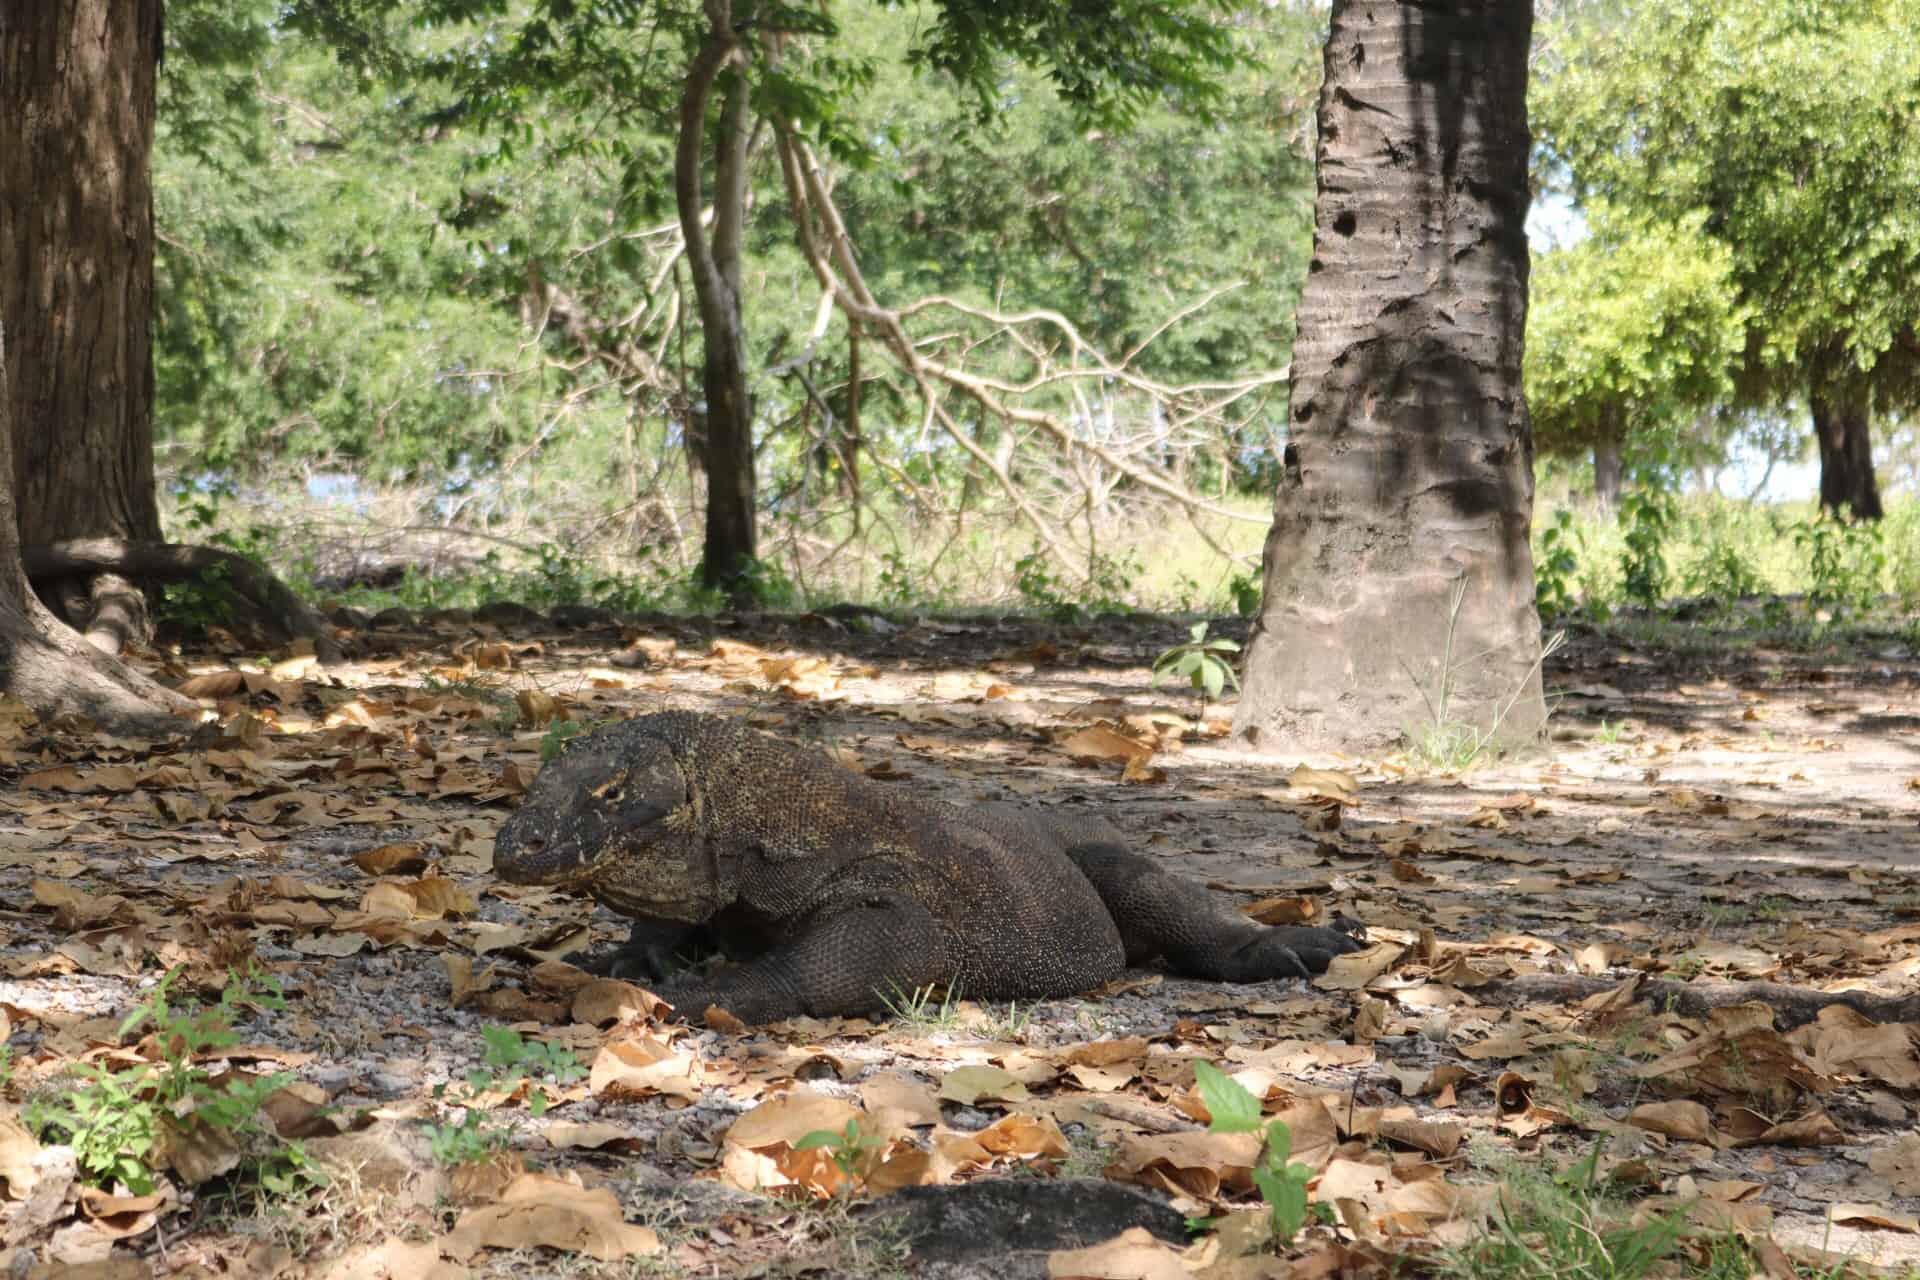 Komodo dragon laying on the ground and some trees